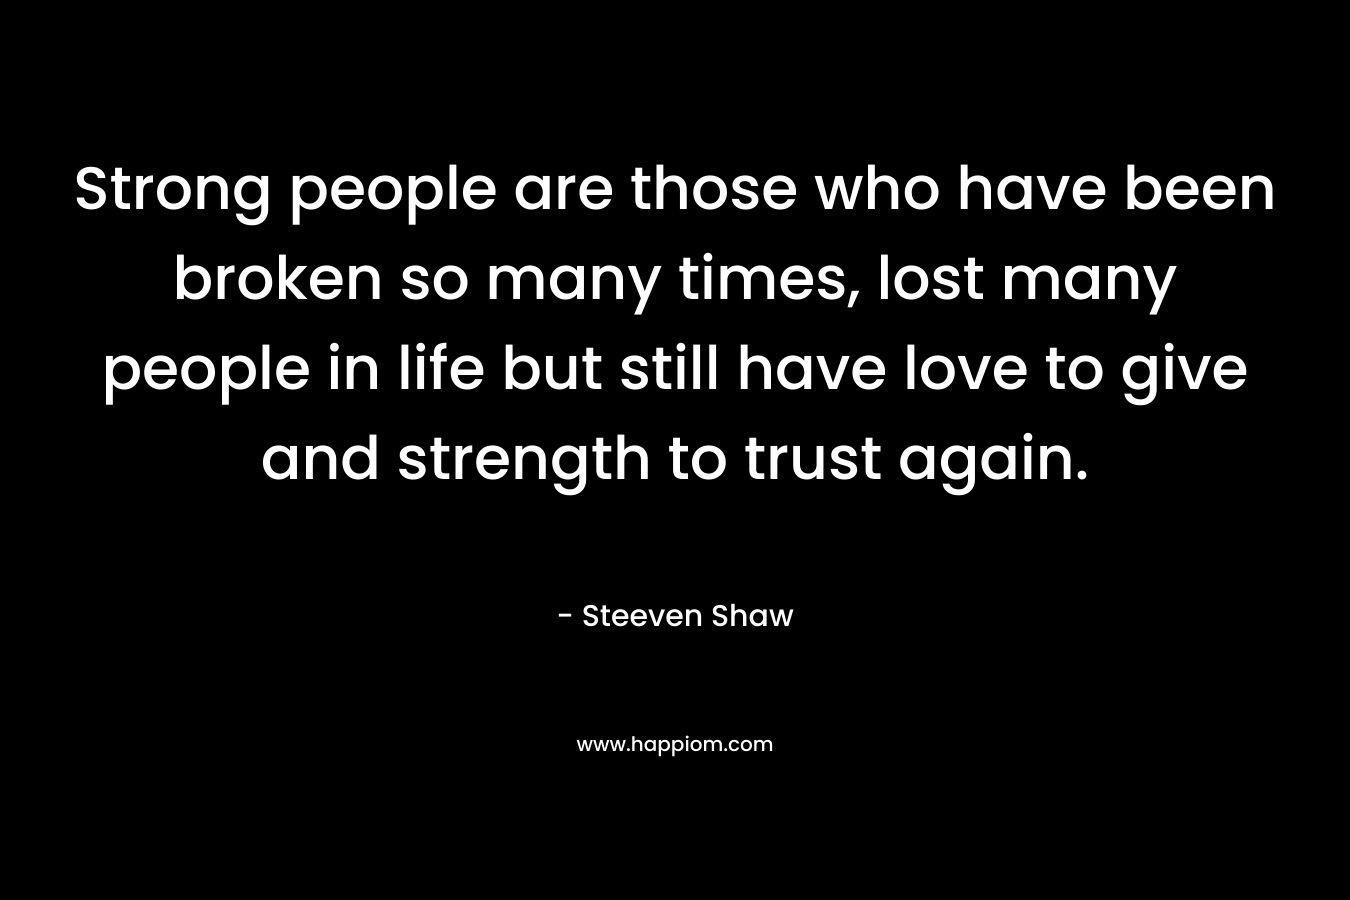 Strong people are those who have been broken so many times, lost many people in life but still have love to give and strength to trust again.